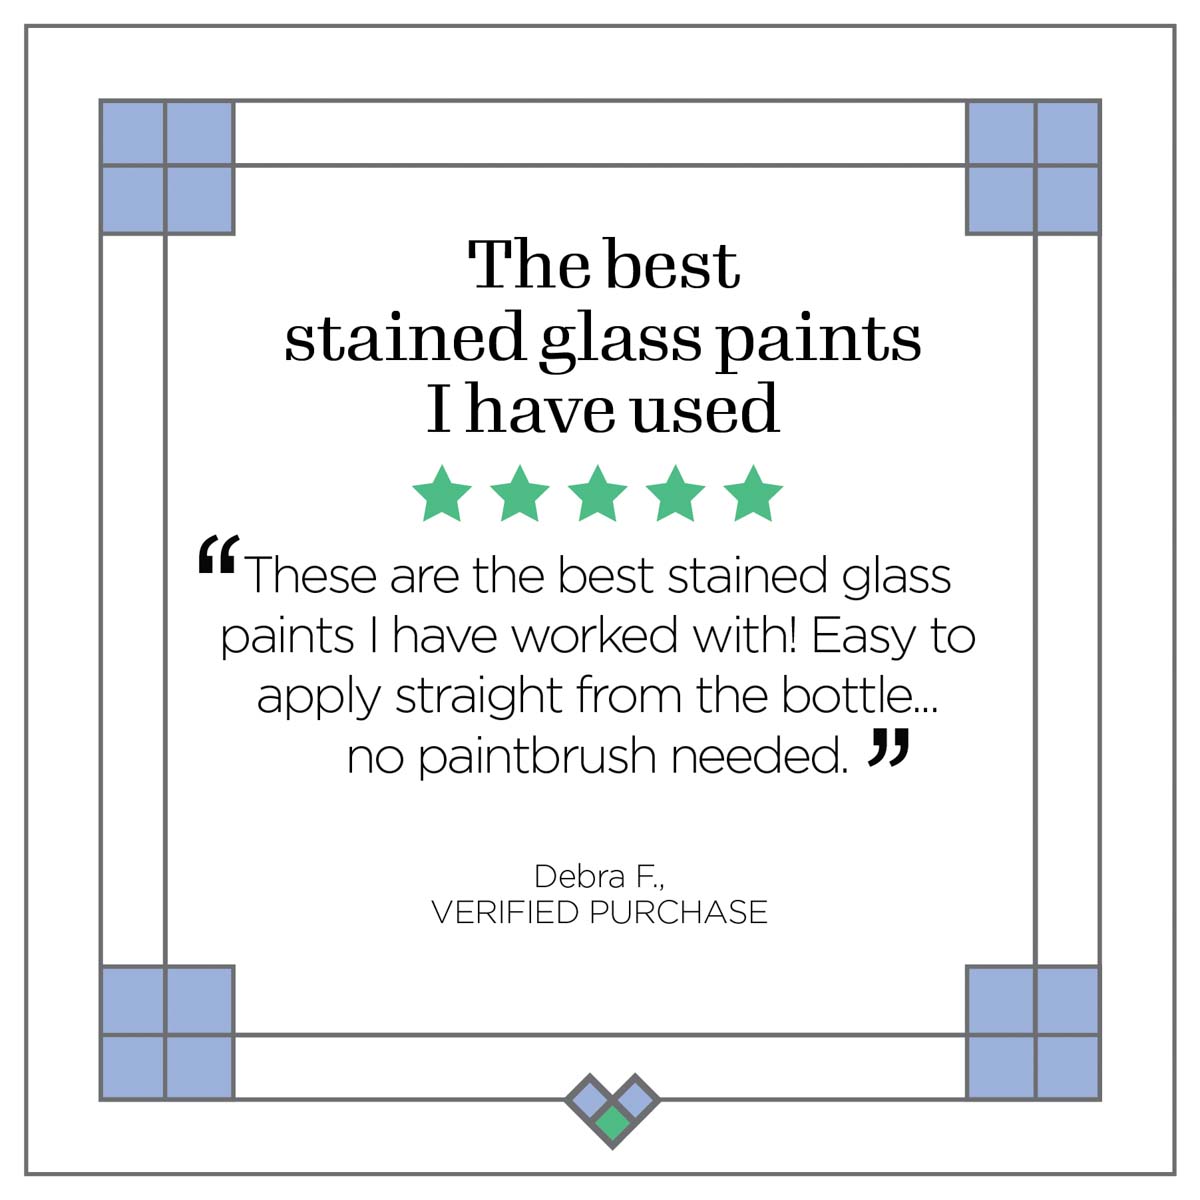 Gallery Glass ® Stained Glass Effect Paint - Crystal Clear, 2 oz. - 19693